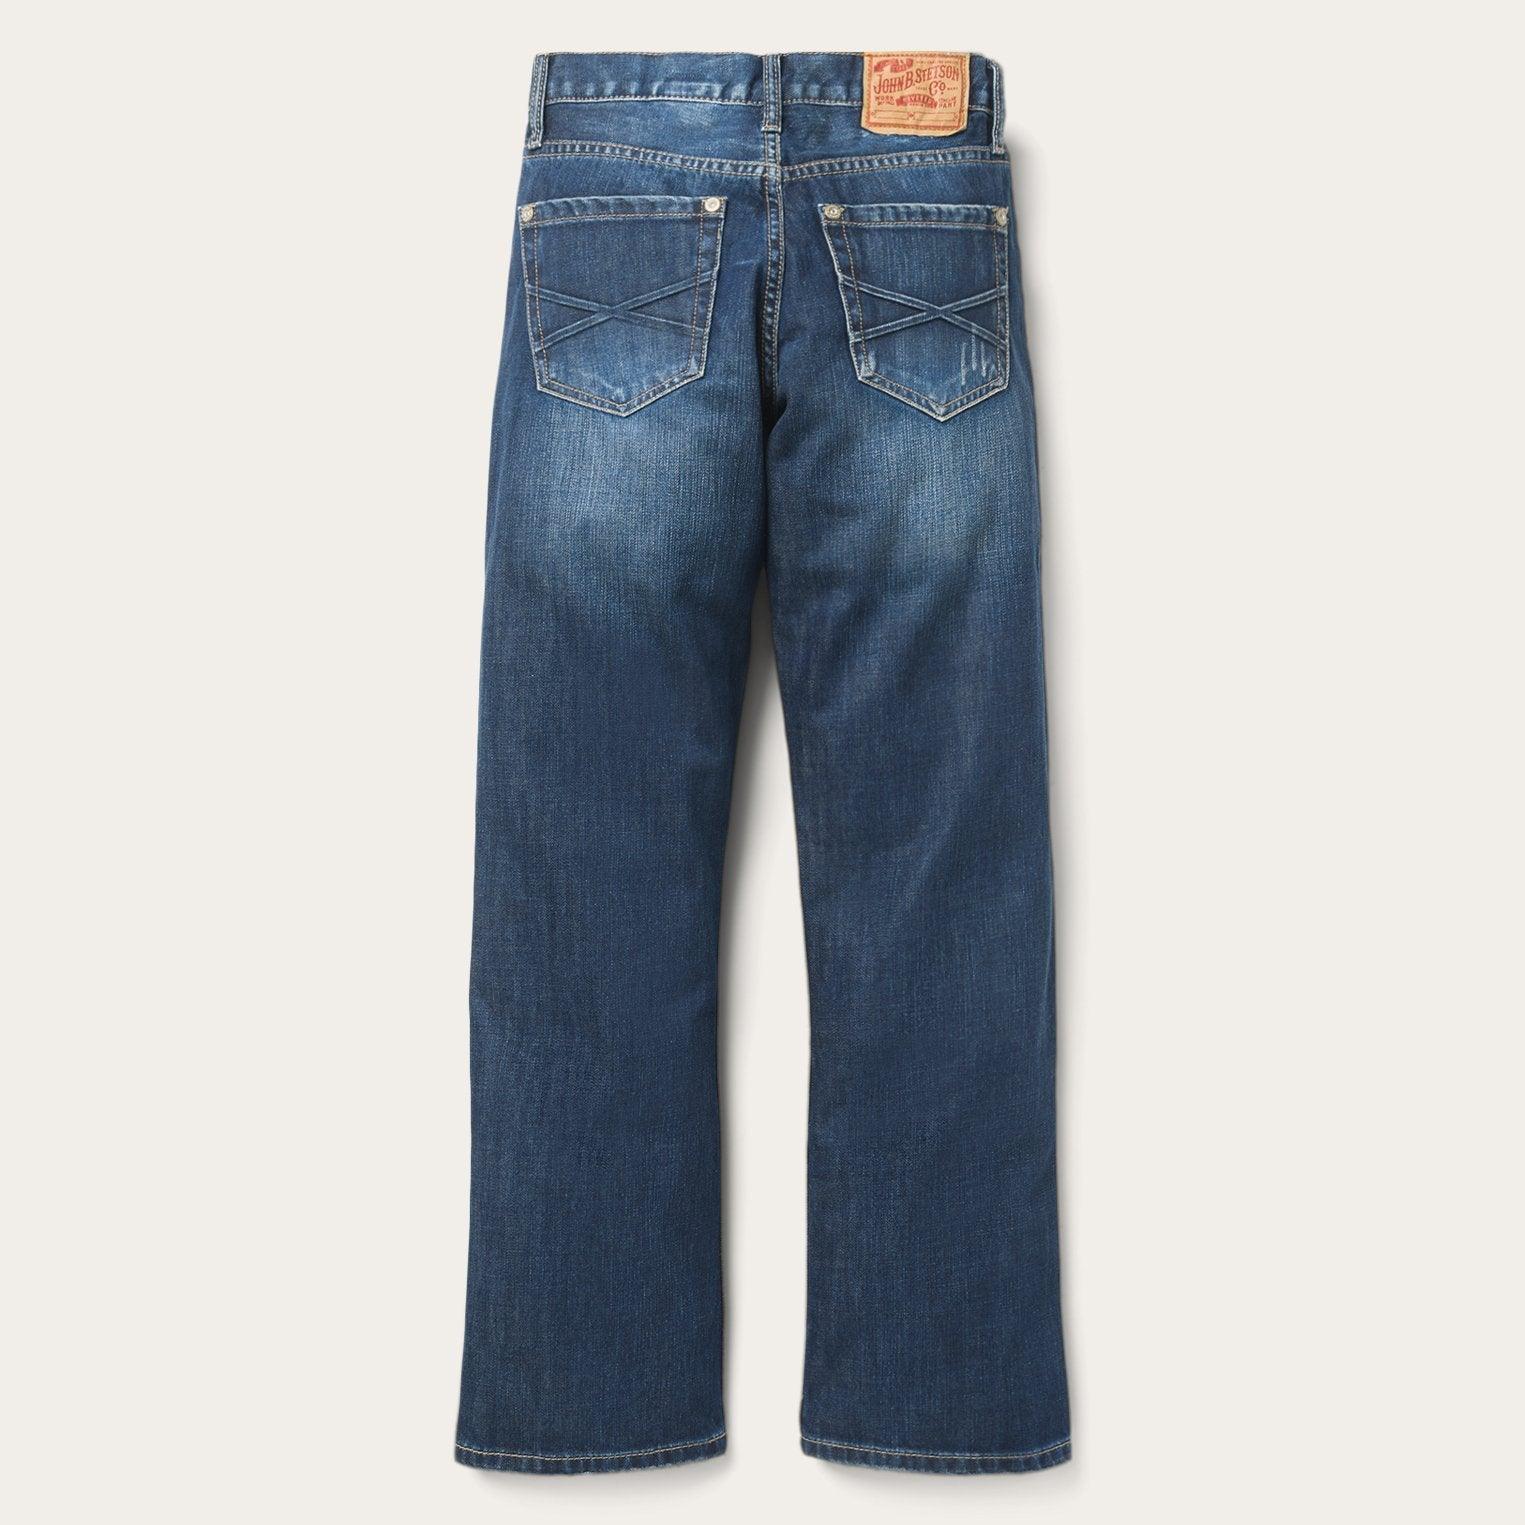 Stetson 1312 Fit Jeans With Back Pocket Stitching - Flyclothing LLC